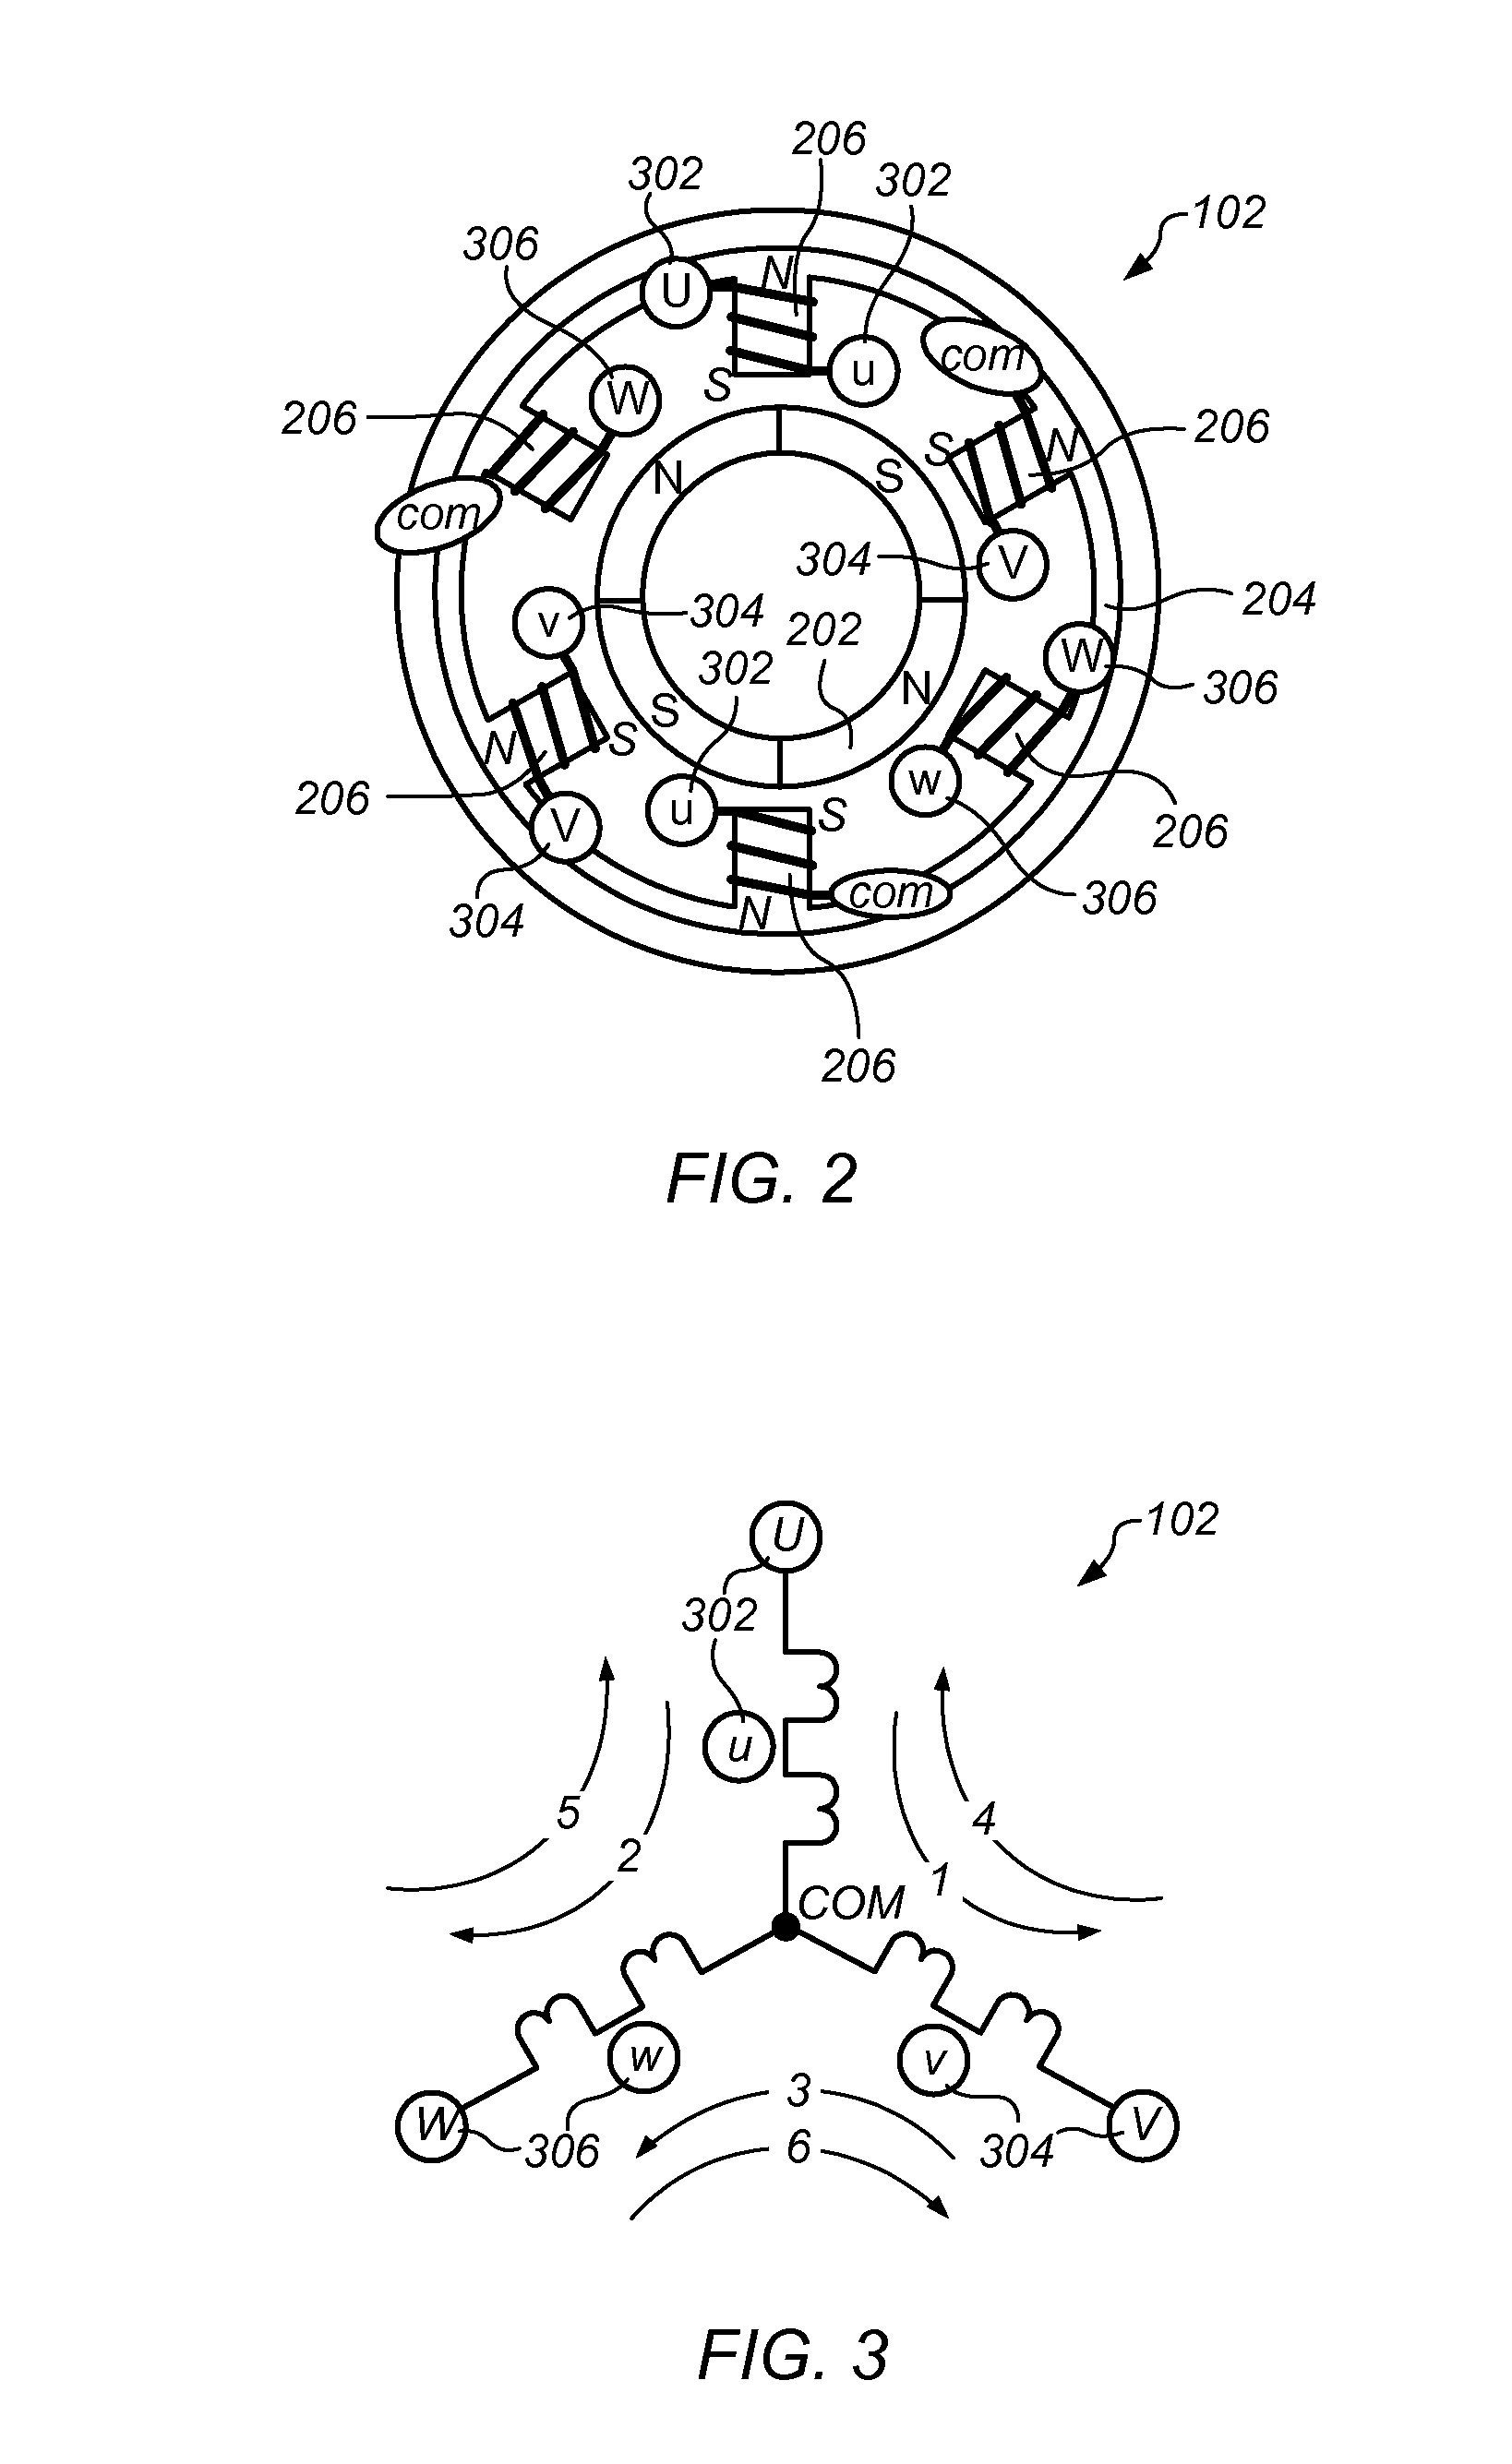 Method for Aligning and Starting a BLDC Three Phase Motor